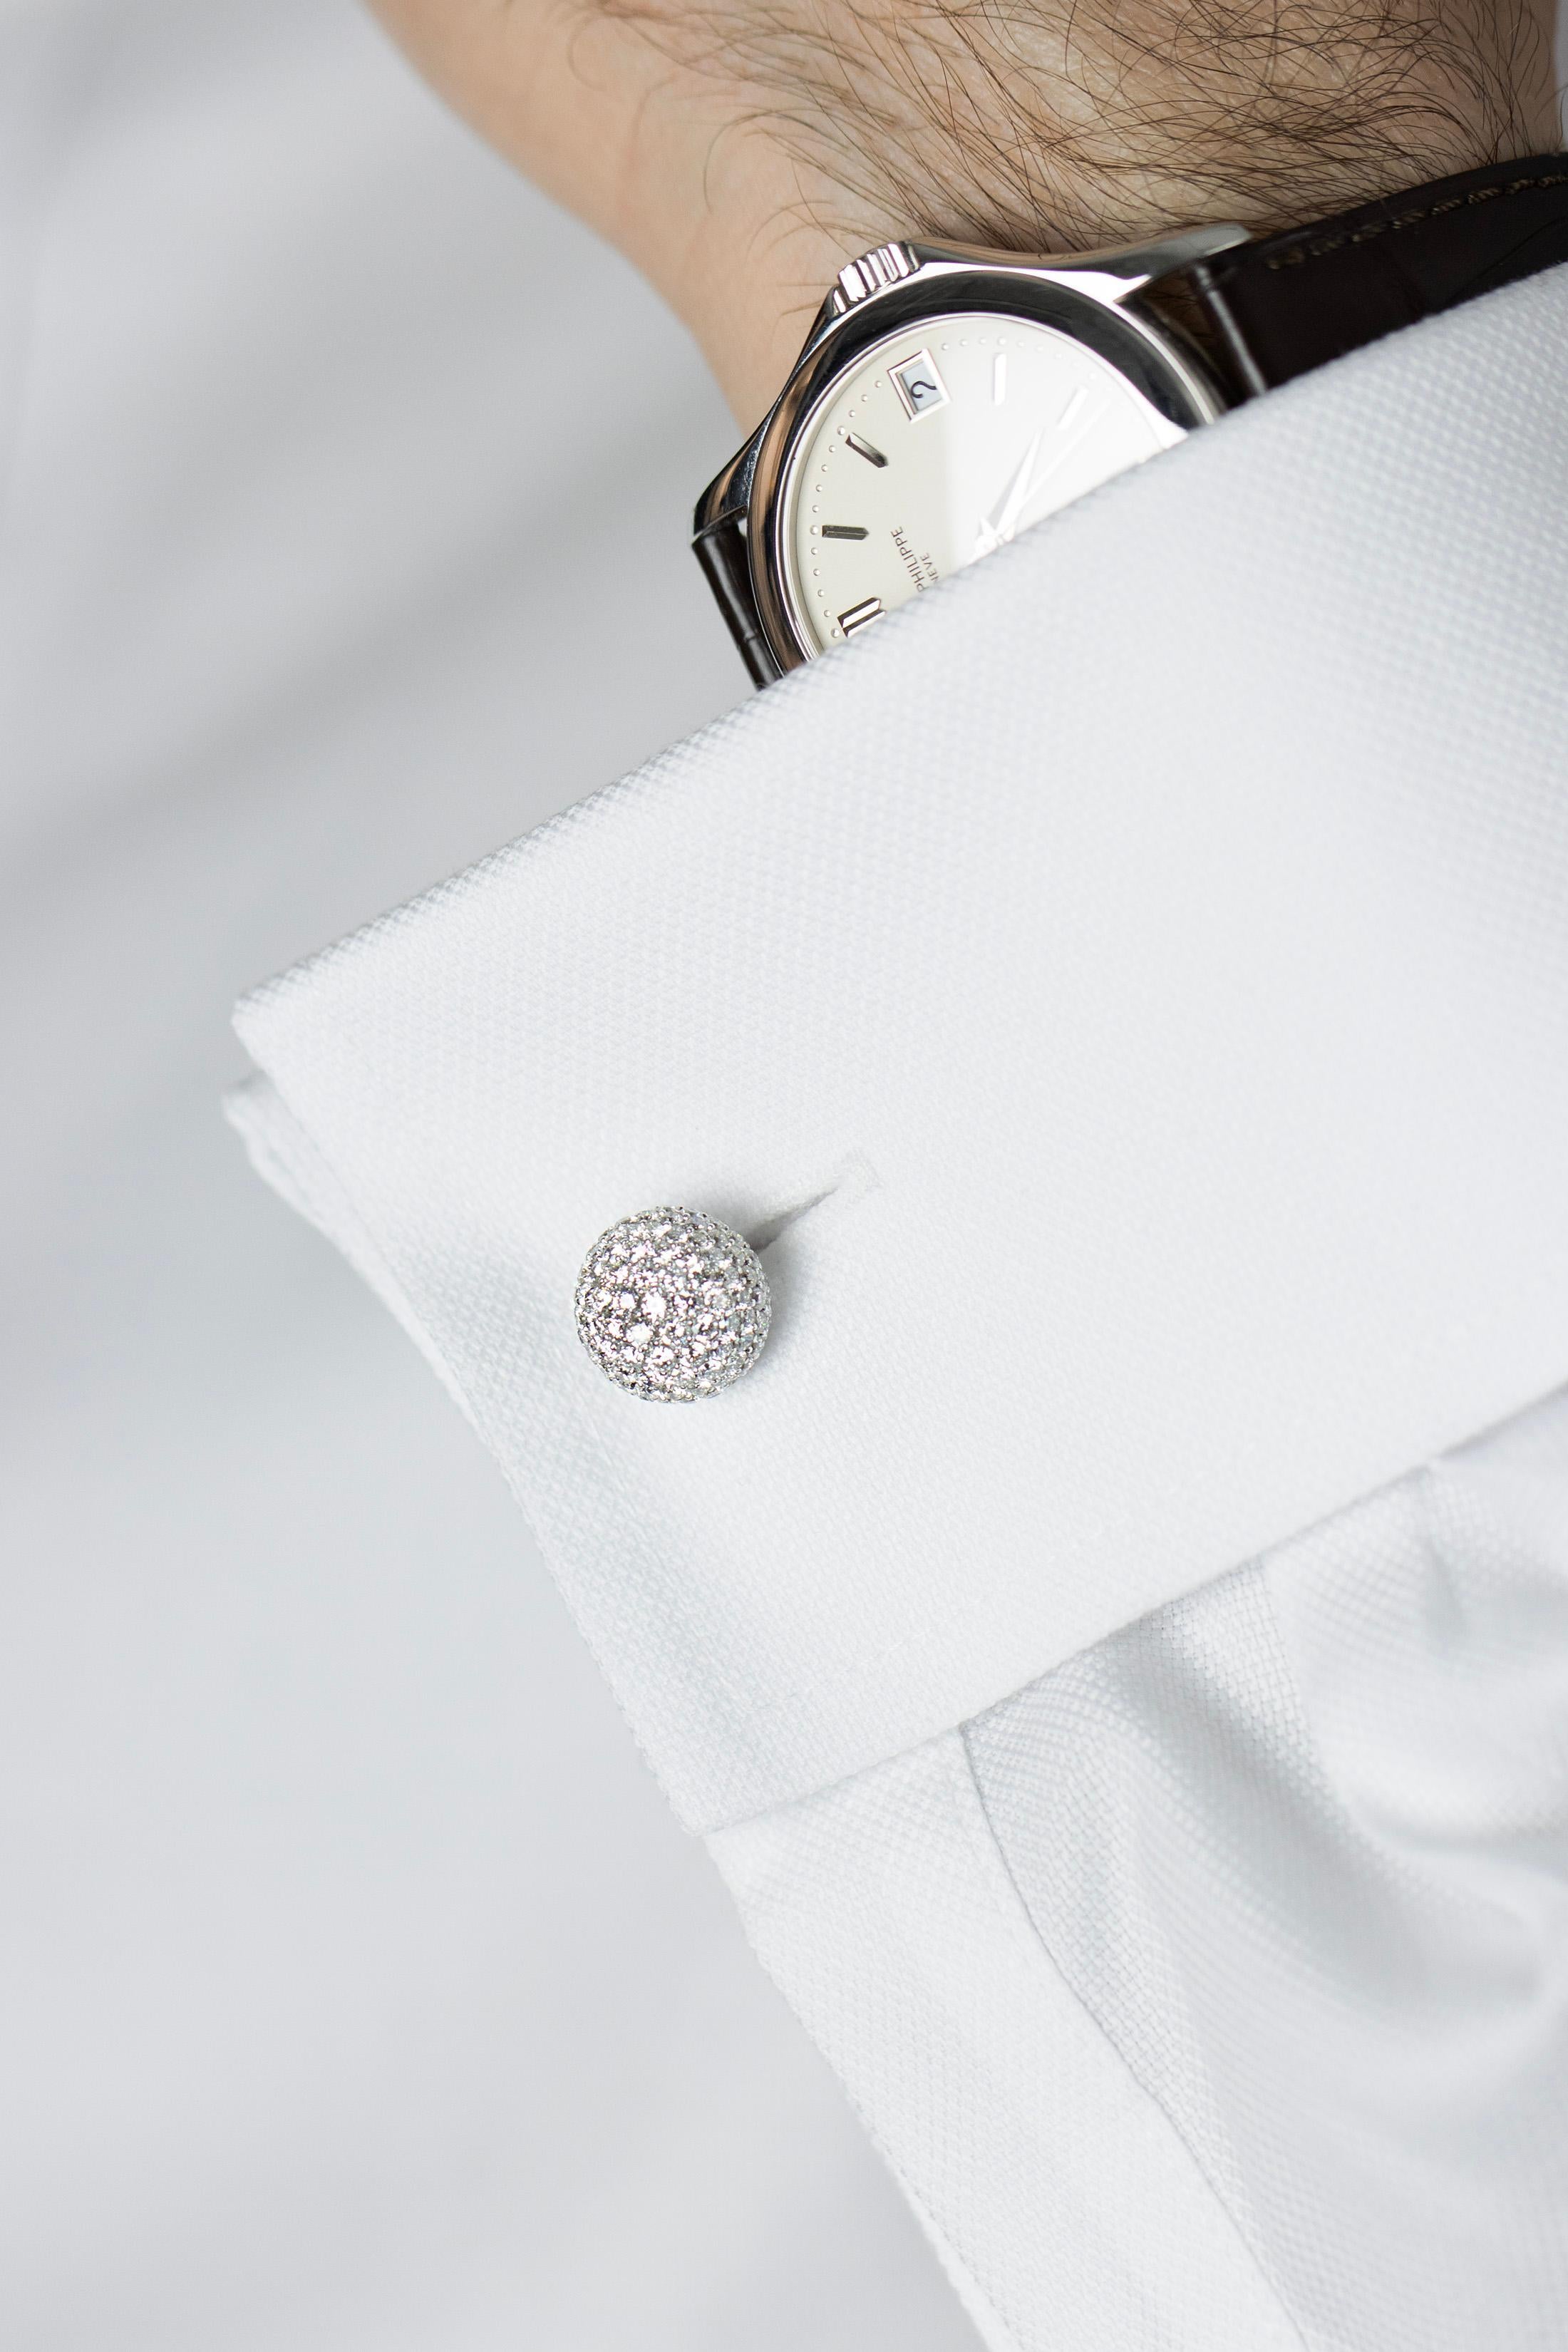 Diamond Encrusted Rounded Face White Gold Cufflinks For Sale 3